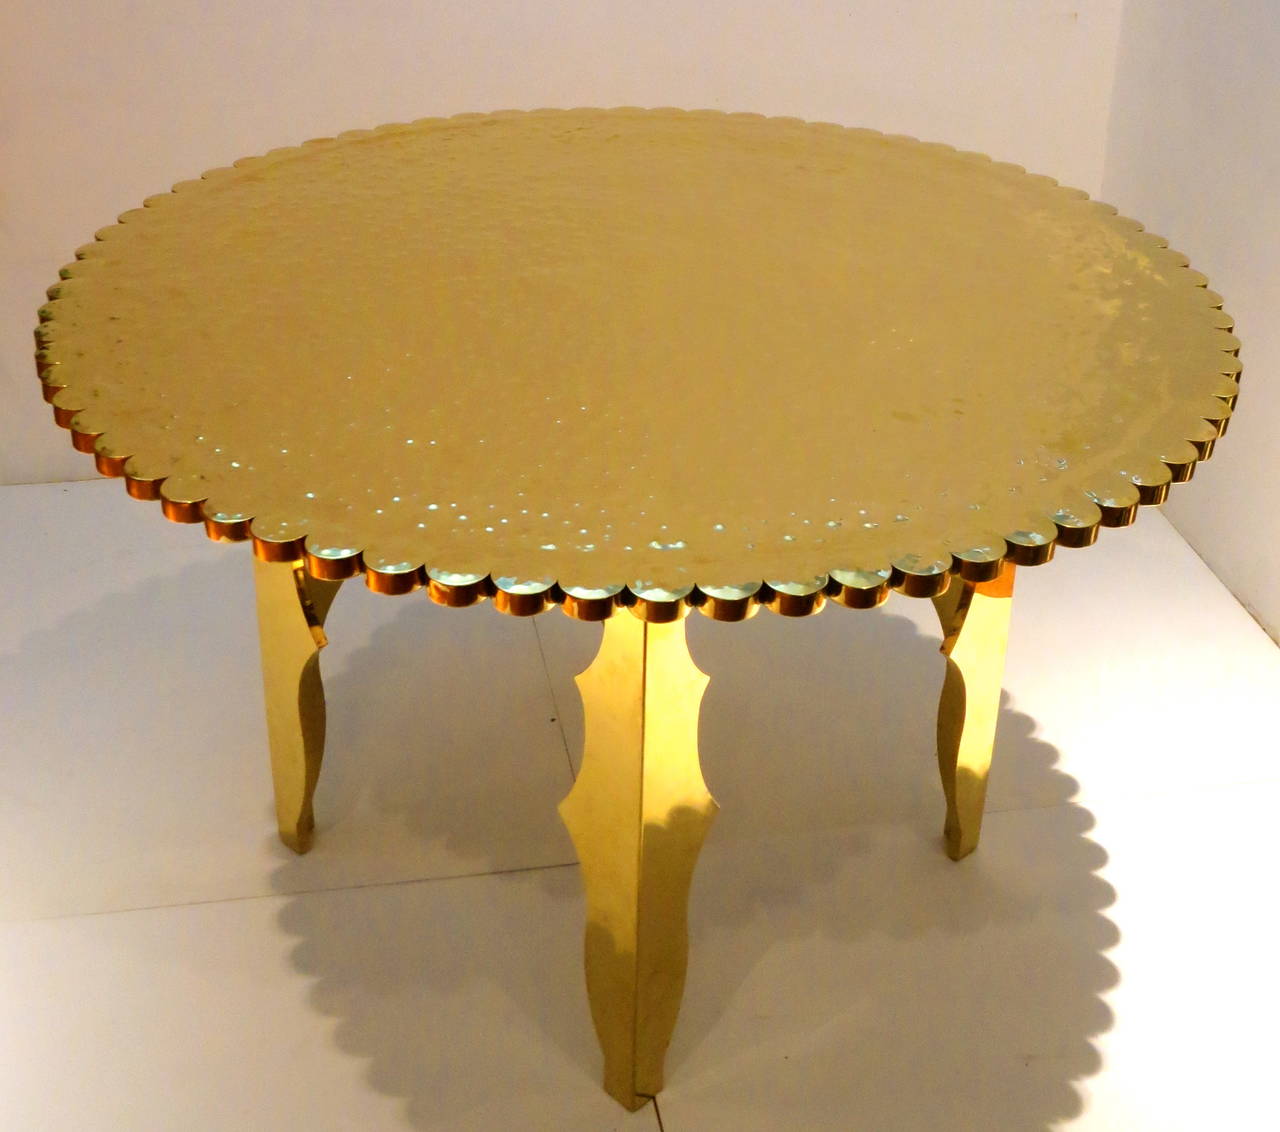 Monumental Large Brass Entry Table Hand-Hammered Top Scalloped Edge 2